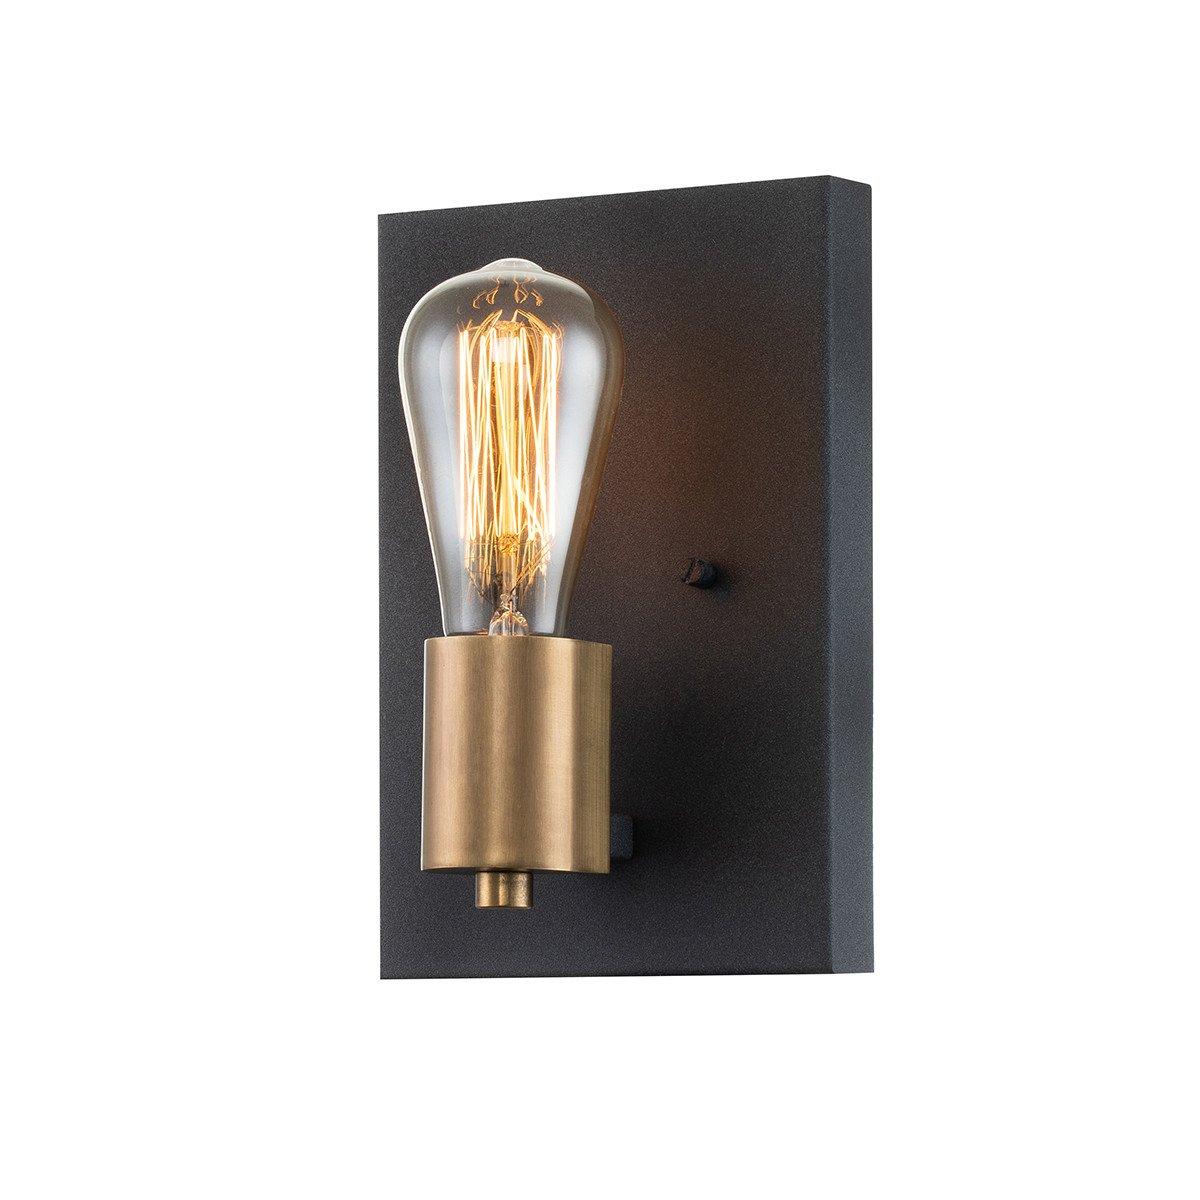 Hinkley Silas Wall Lamp Aged Zinc & Heritage Brass